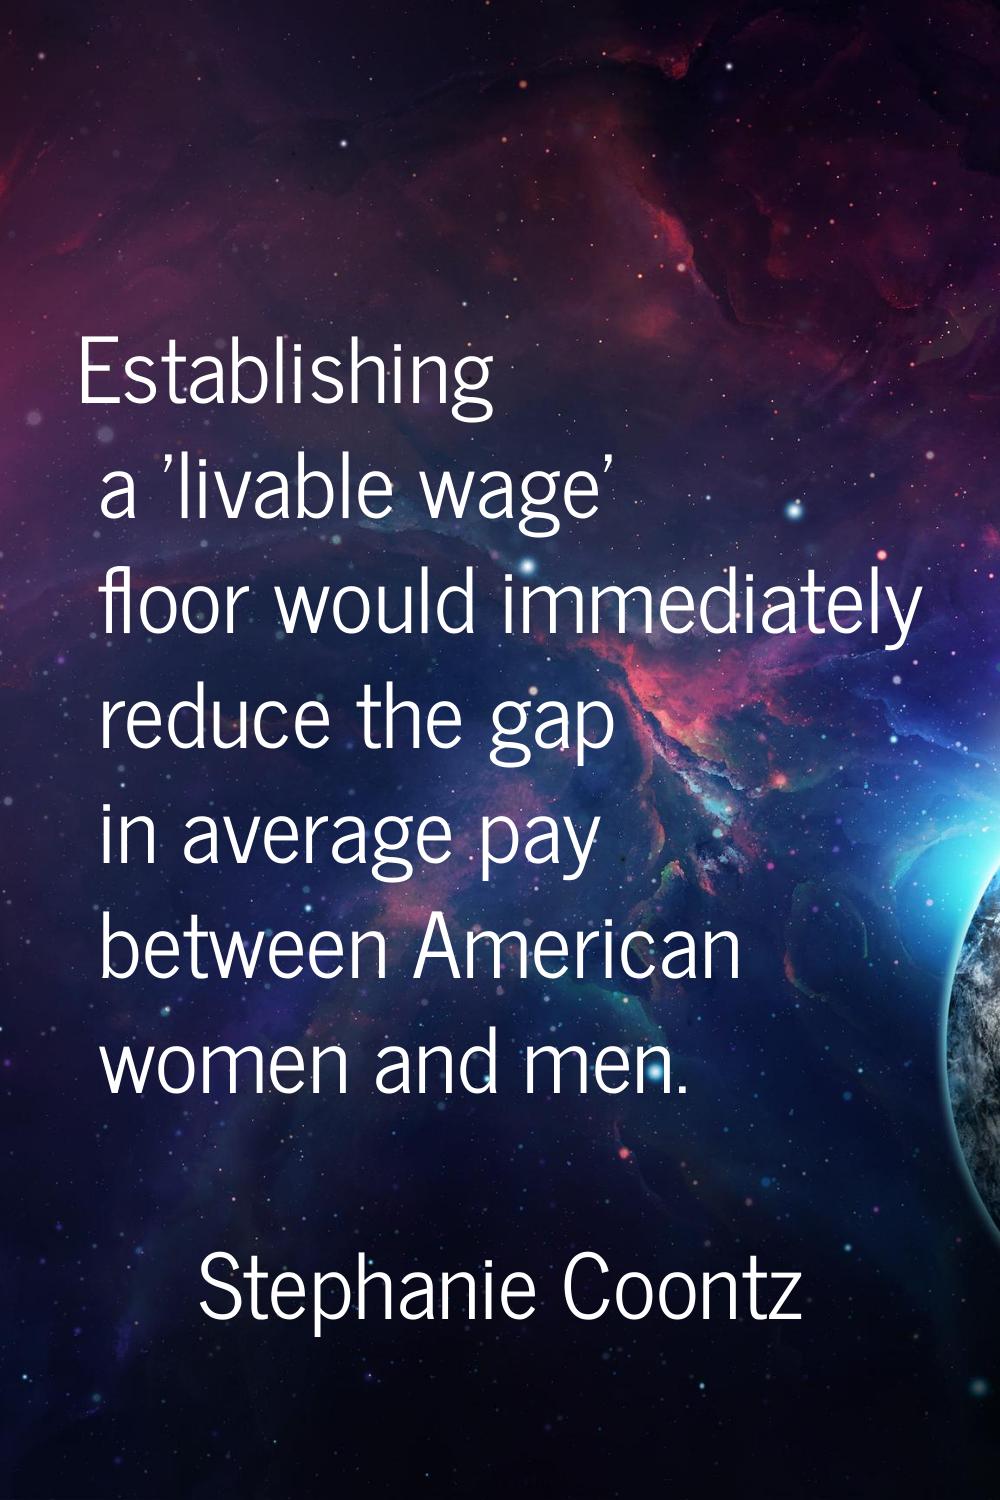 Establishing a 'livable wage' floor would immediately reduce the gap in average pay between America